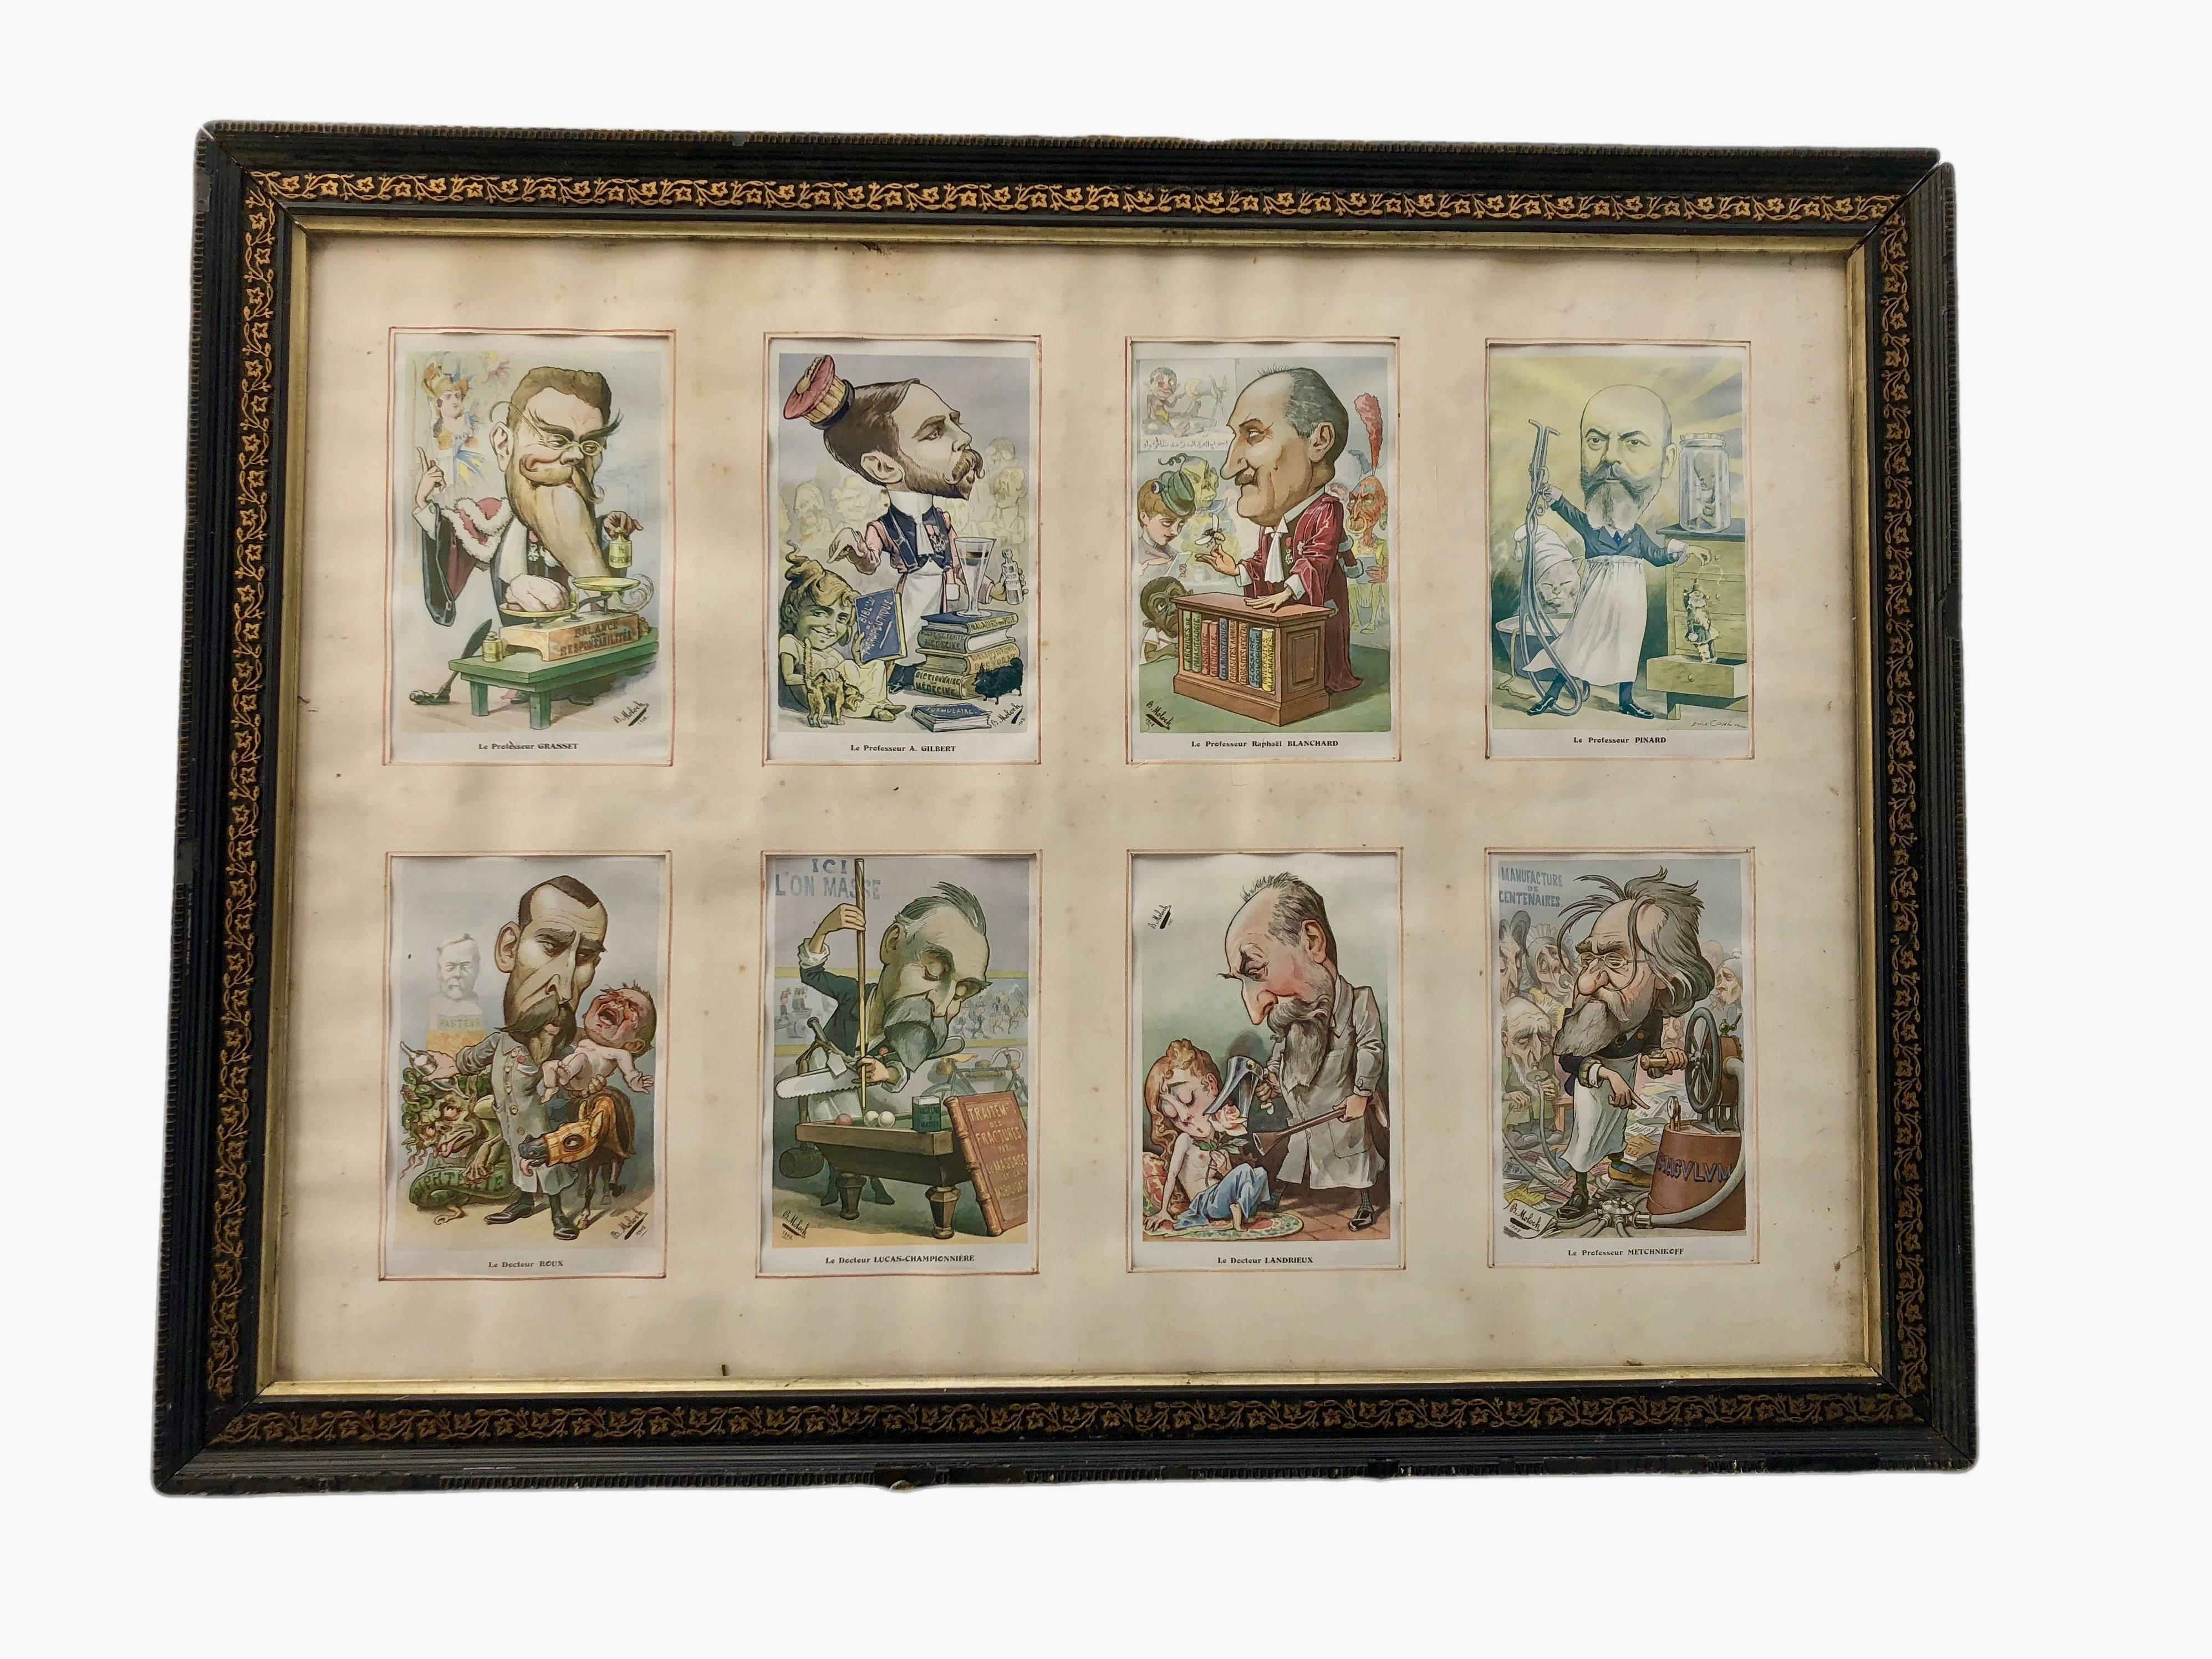 This is a set of eight color lithographs by French cartoonist B. Moloch, from 1907 and 1908. All are in their two original black frames with gold detailed trim (four lithographs per frame) and include the name of each caricature. 

French